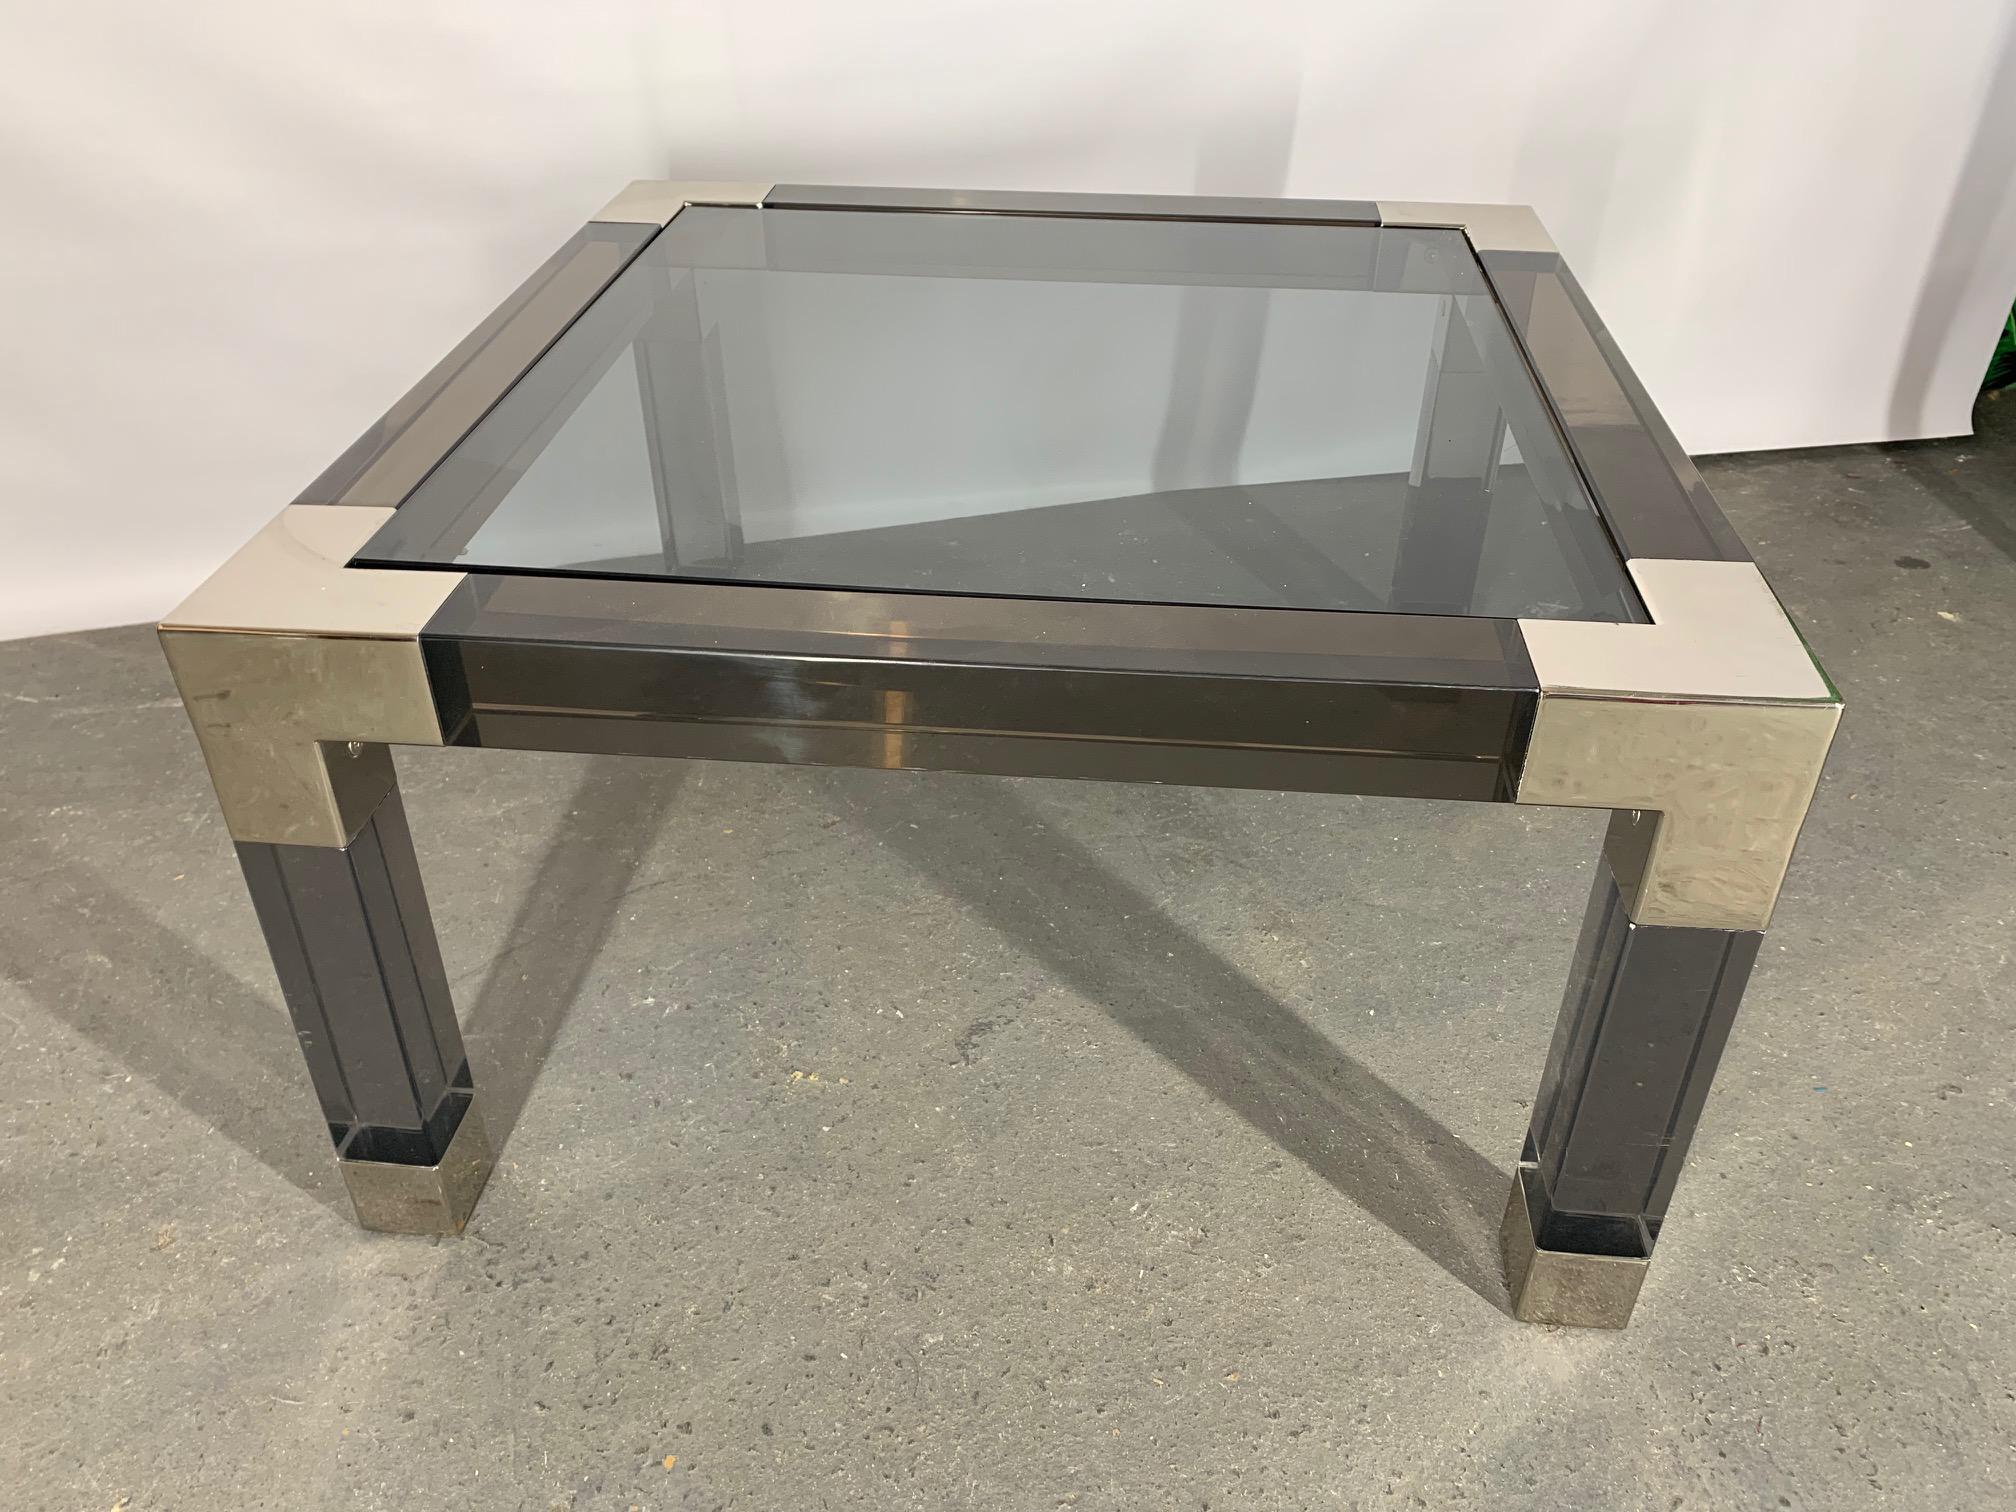 Heavy lucite table by Jonathan Adler features chrome accents and smoked glass top. Good condition with minor surface marks on chrome.
For a shipping quote to your exact zip code, please message us.
